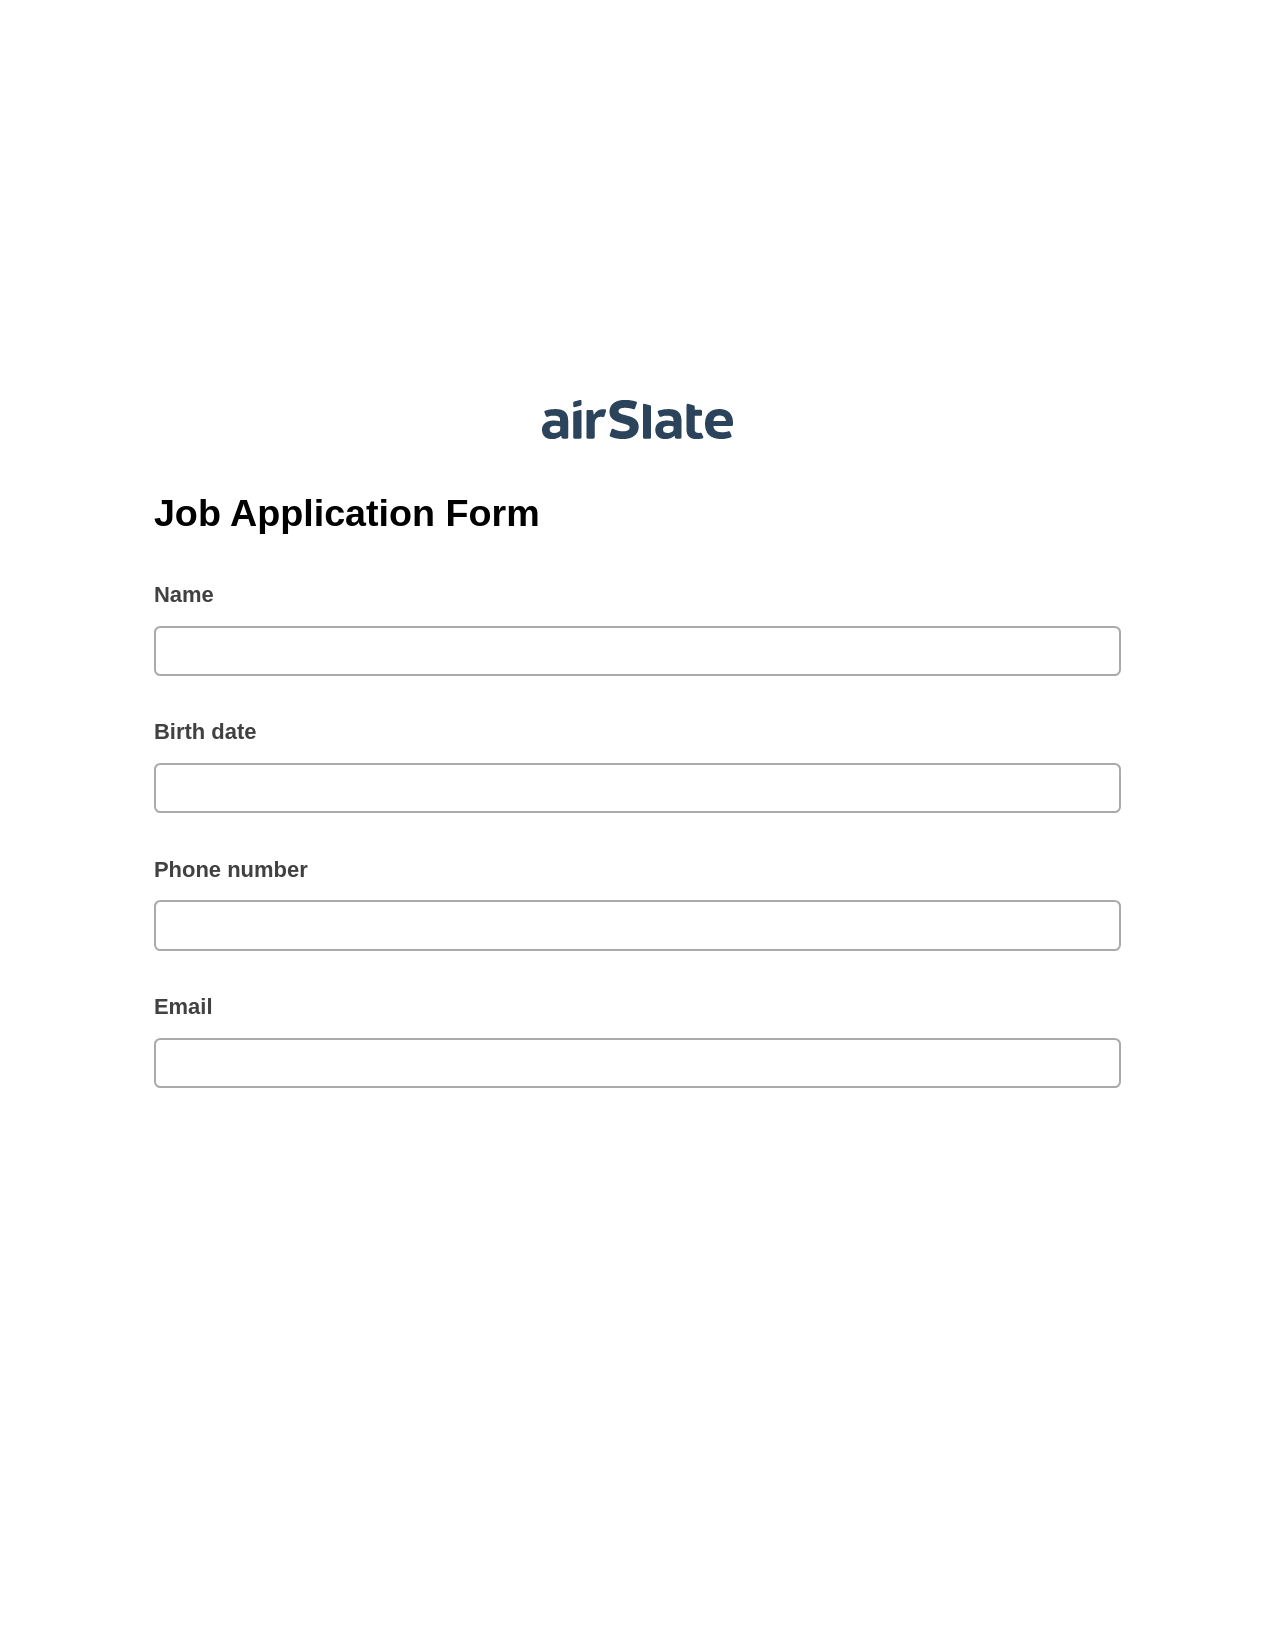 Job Application Form Pre-fill from Salesforce Record Bot, Create MS Dynamics 365 Records Bot, Export to Smartsheet